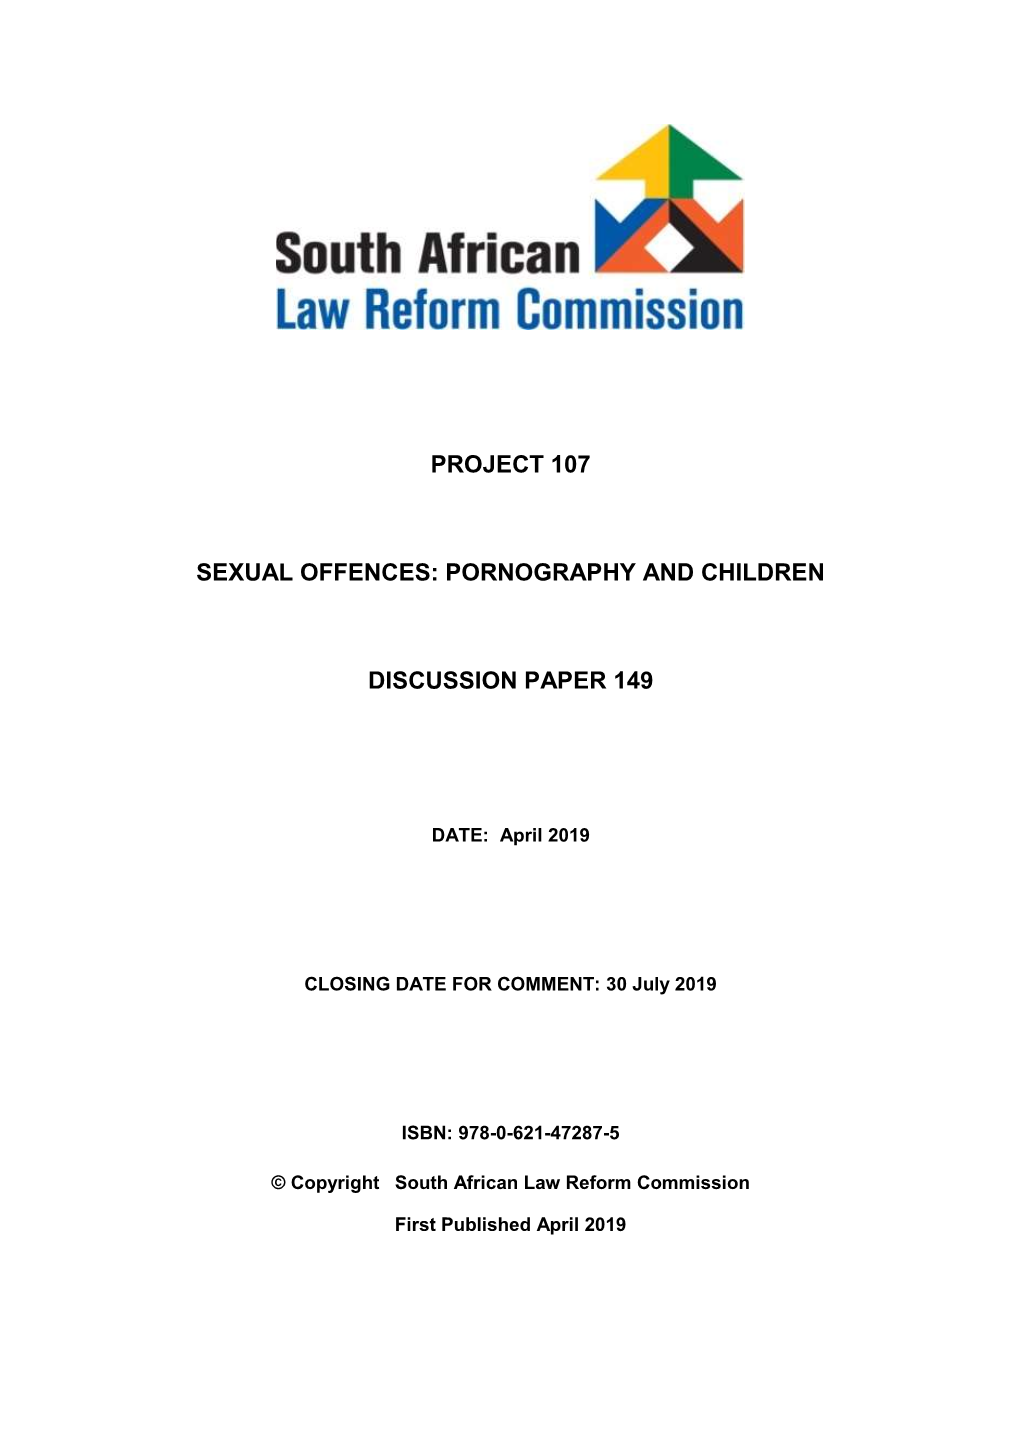 Project 107 – Sexual Offences: Pornography and Children